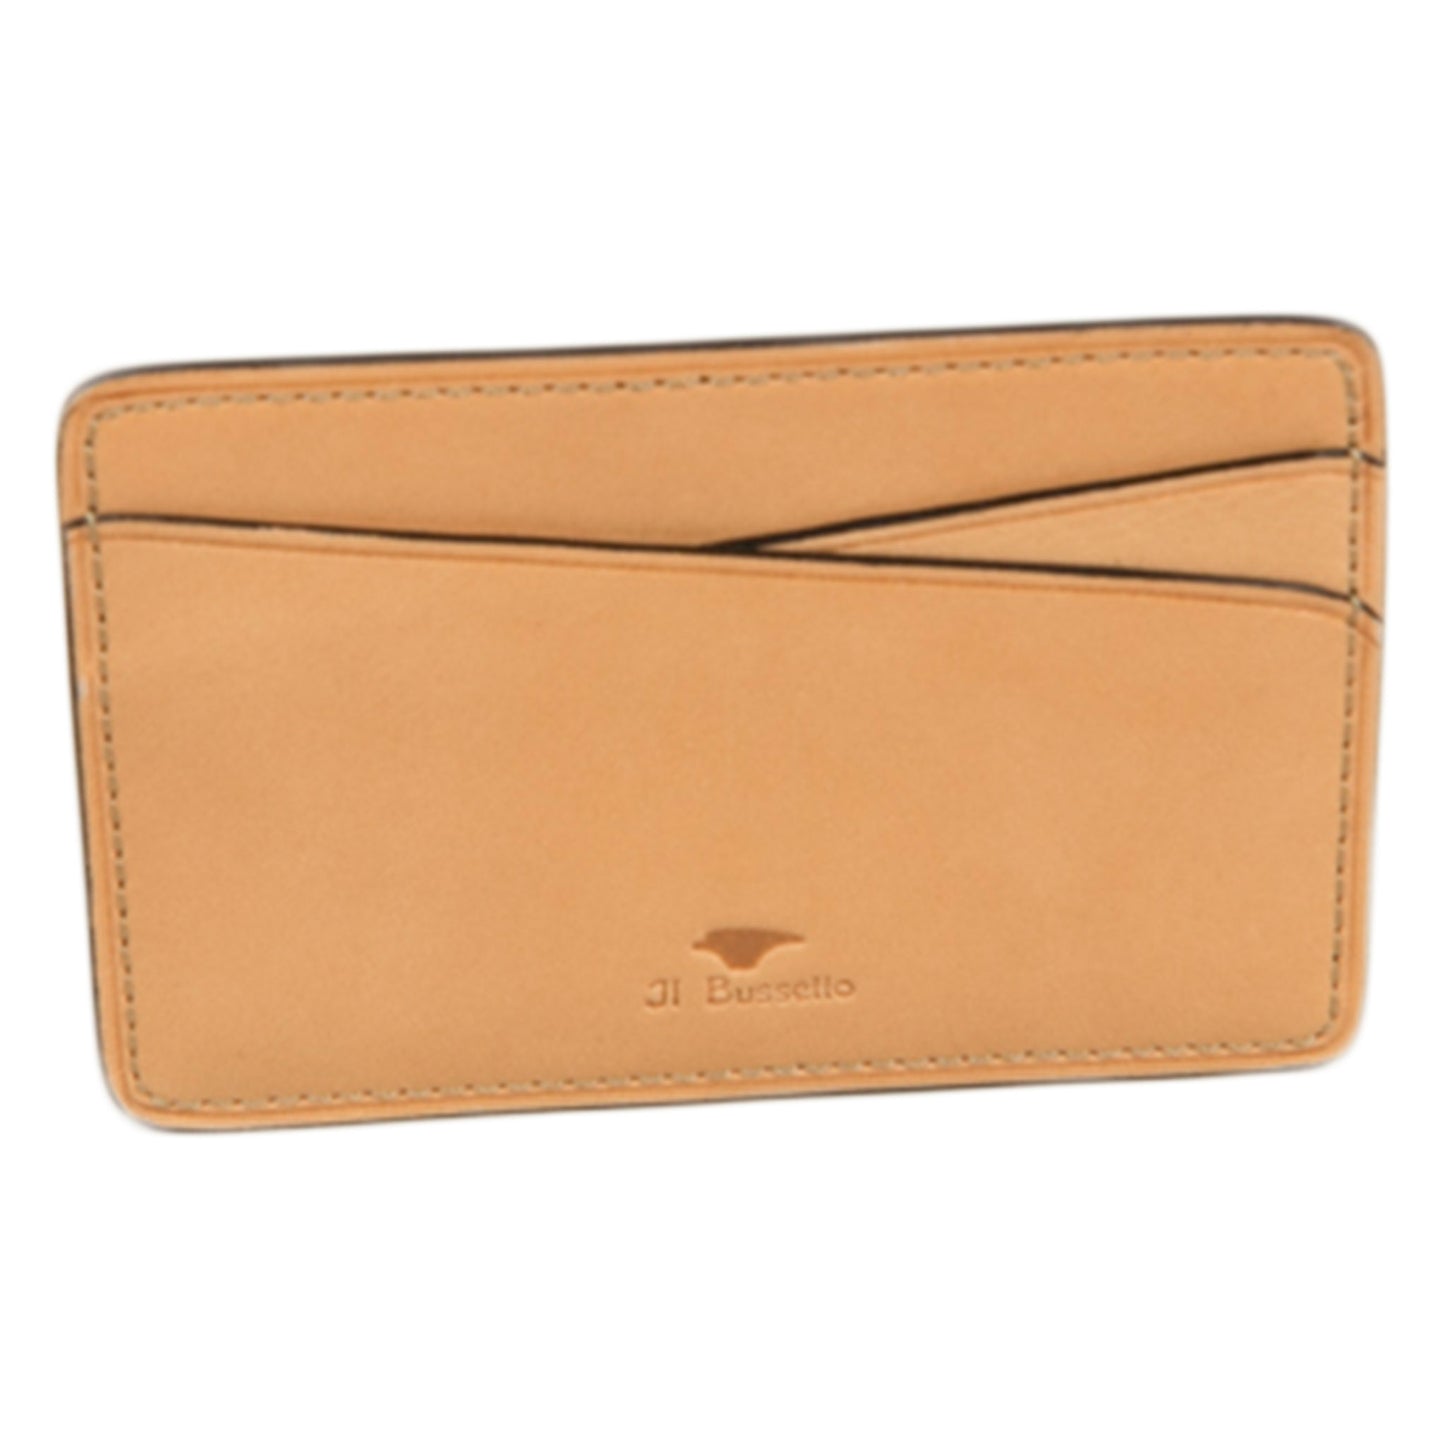 il bussetto magic card wallet in tibetan red